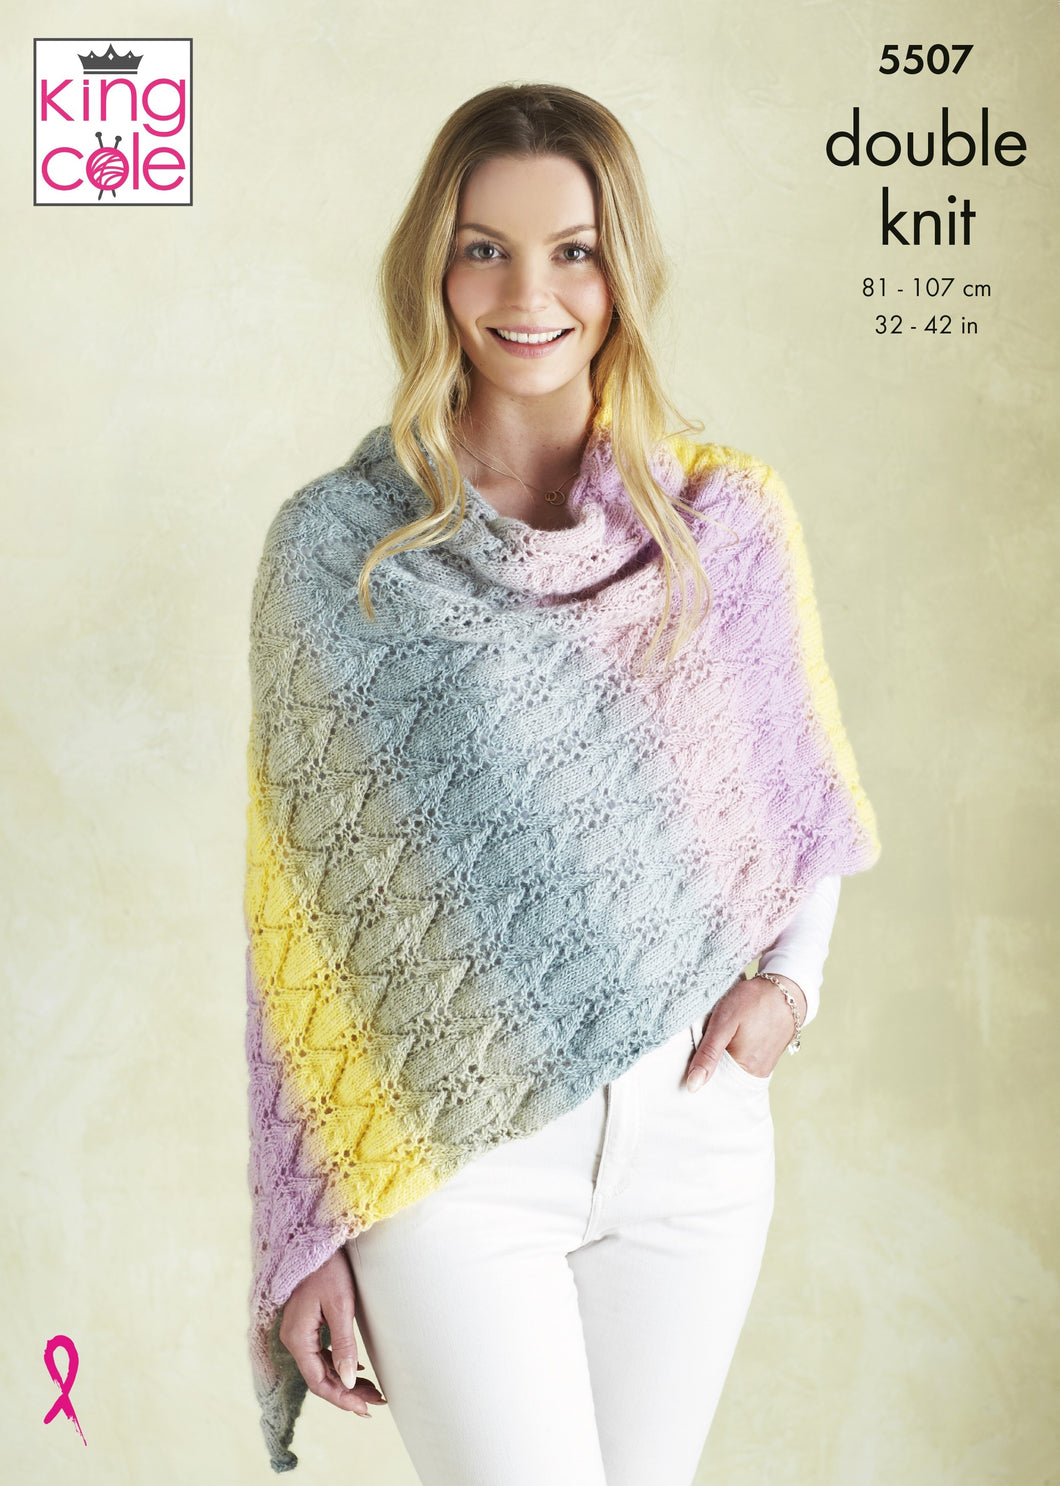 King Cole CURIOSITY DK KNITTING PATTERNS - 5507 Poncho and Snood